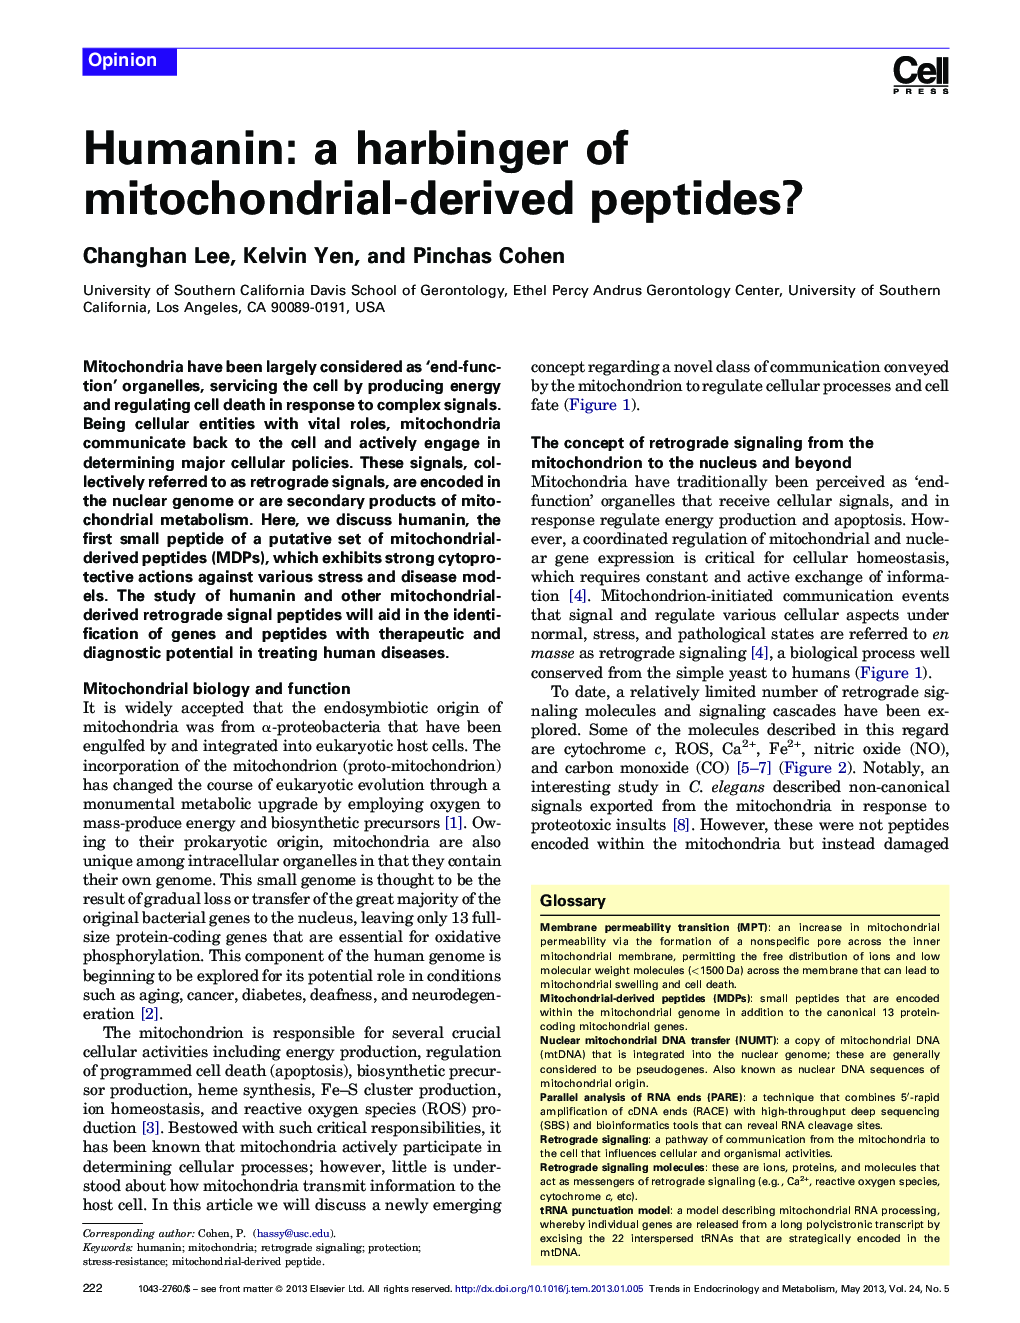 Humanin: a harbinger of mitochondrial-derived peptides?